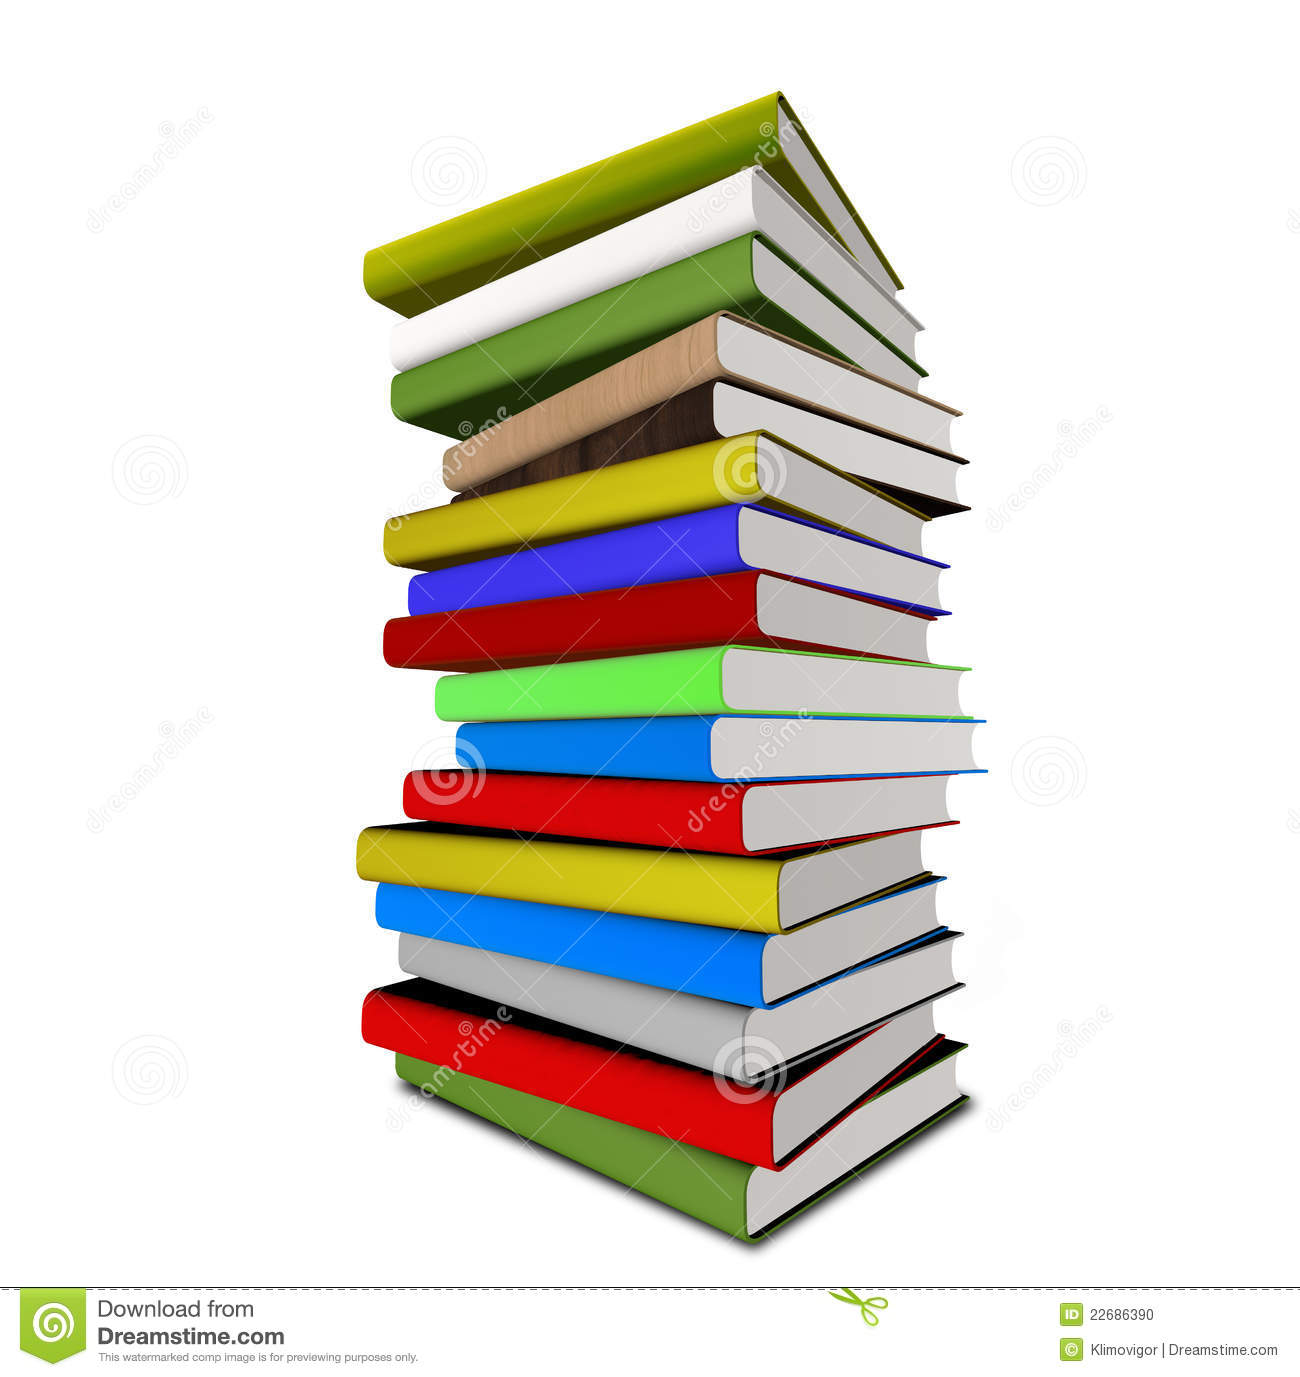 Stack Copyright free images of books clipart collection jpg